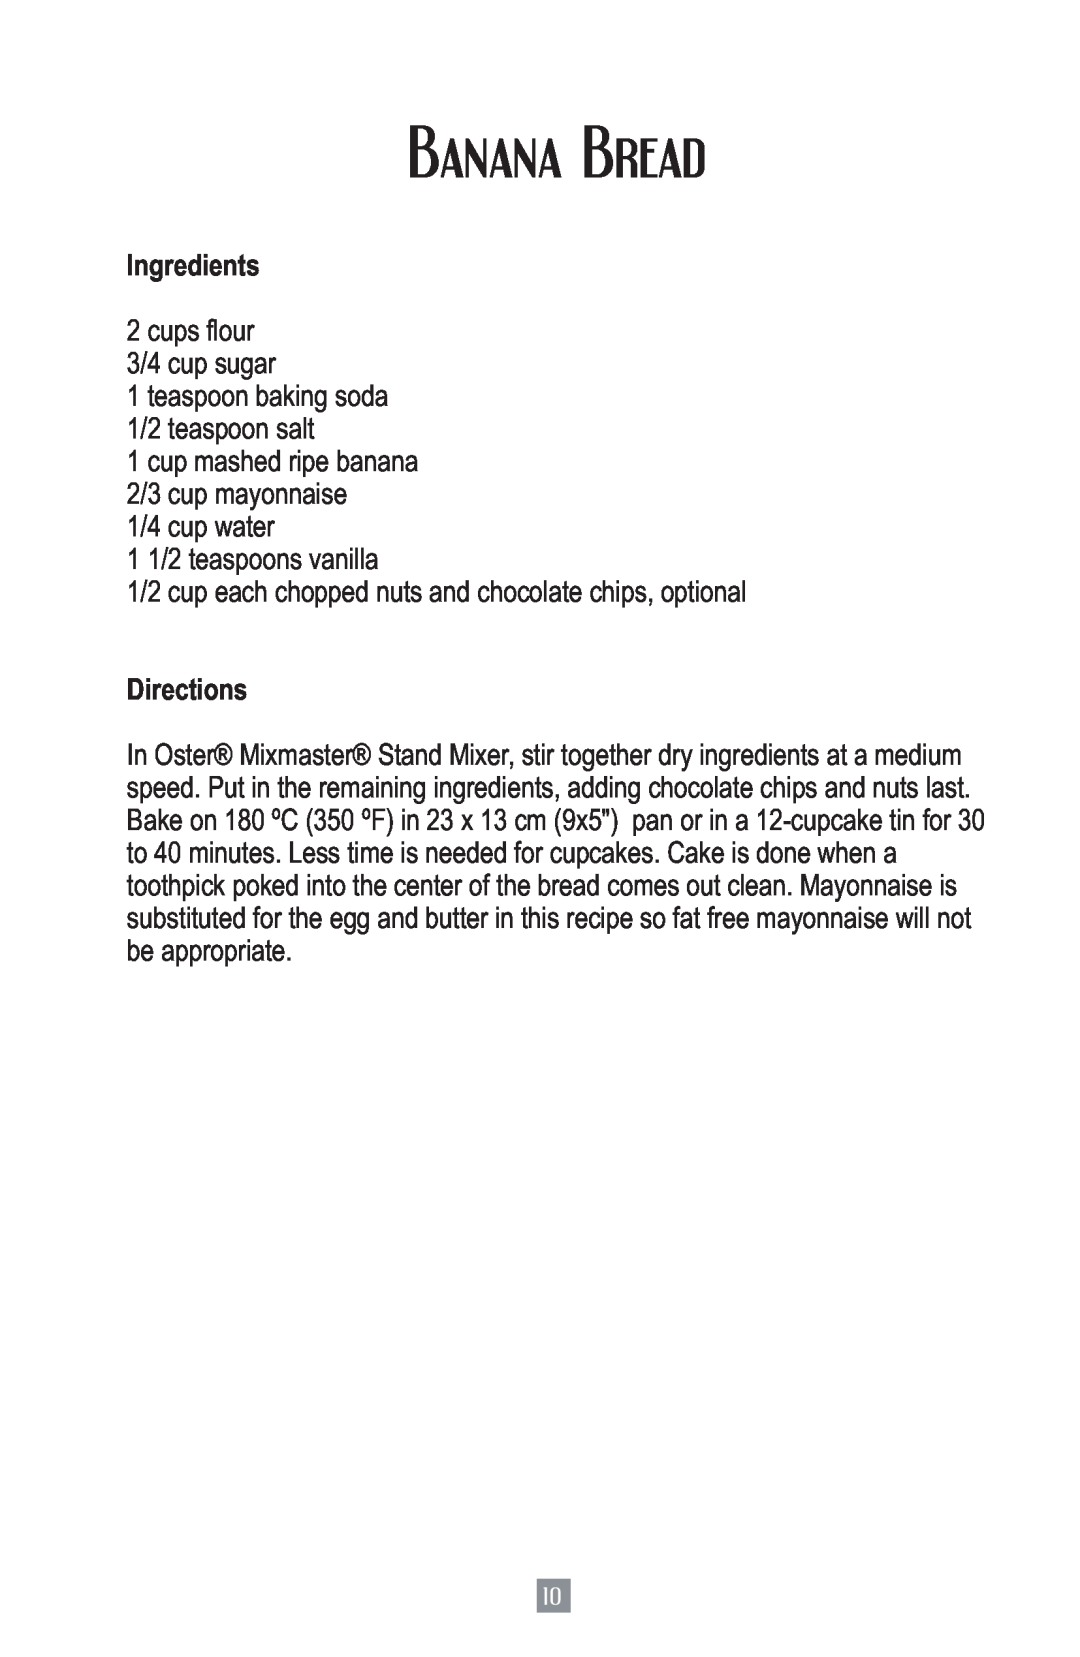 Oster 2700 instruction manual Banana Bread, Ingredients, Directions 